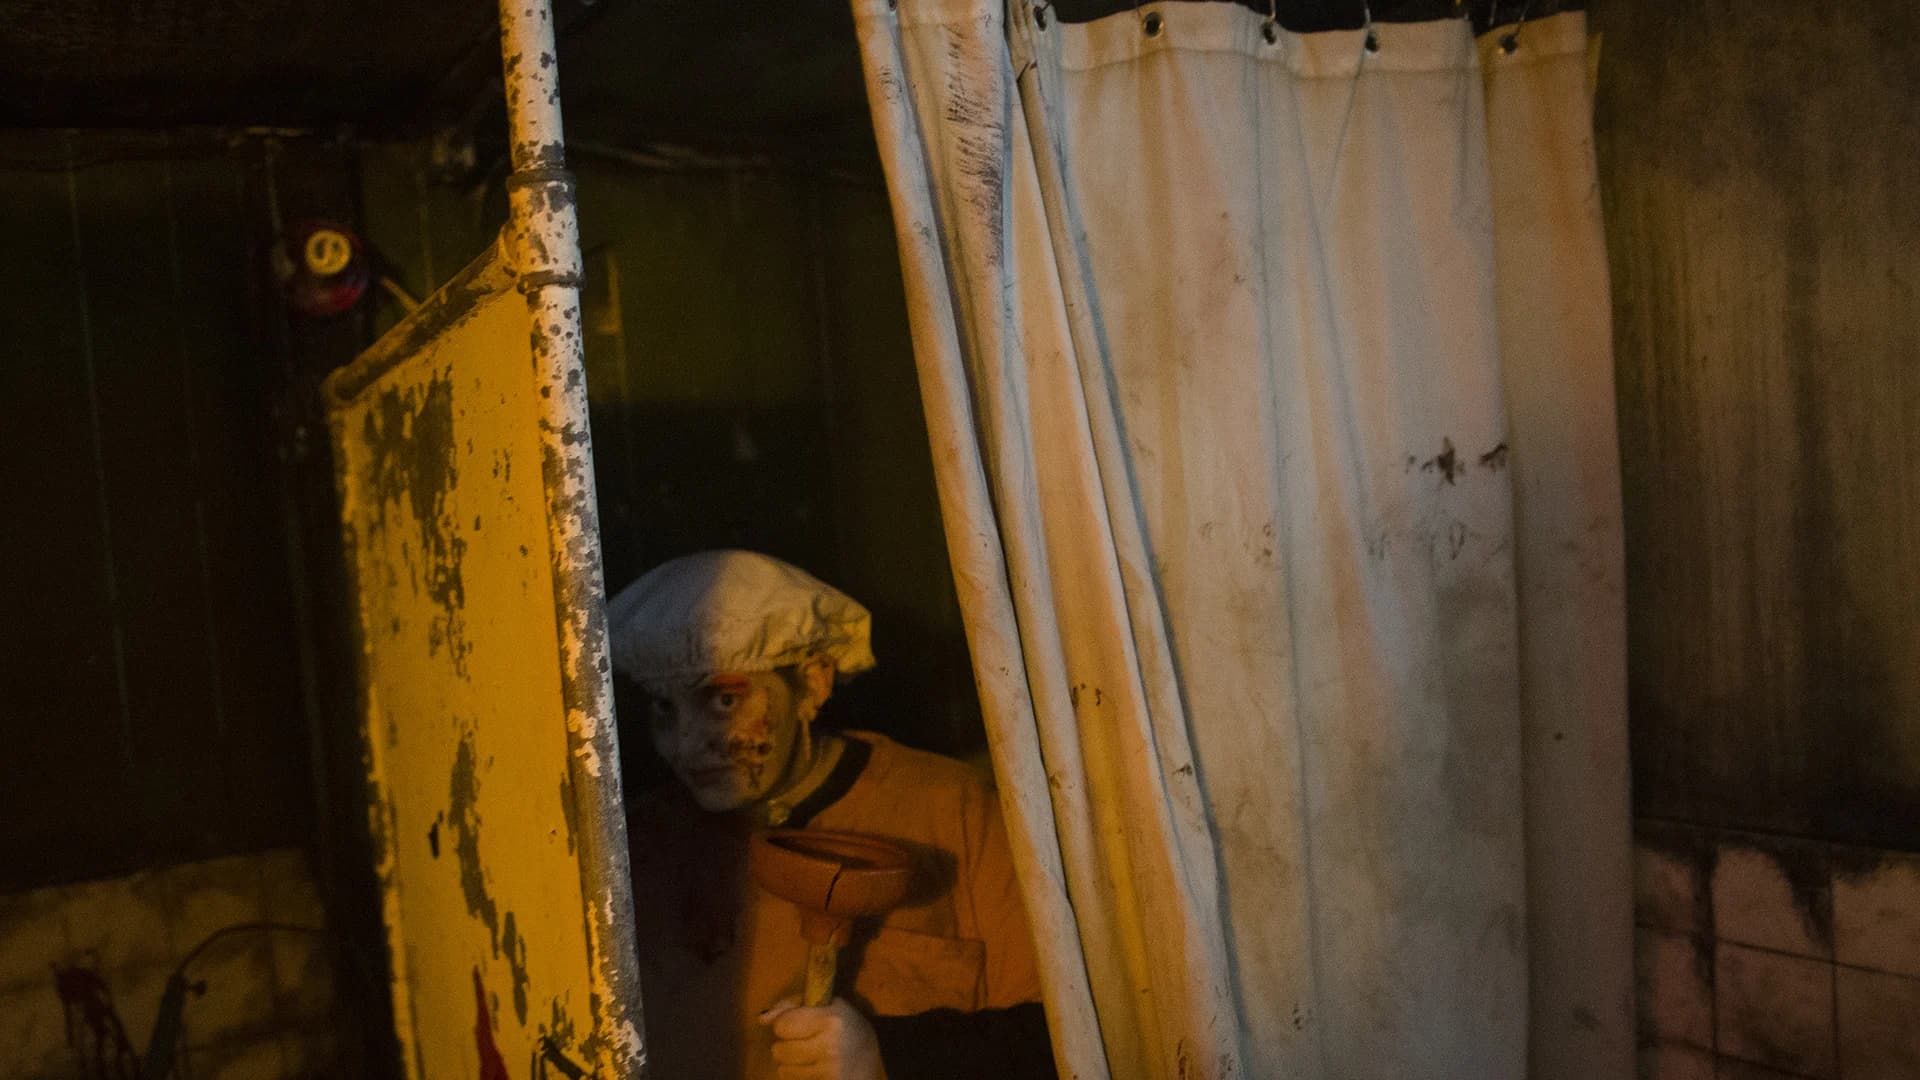 Guide: Get a good scare at these New Jersey Haunted Houses